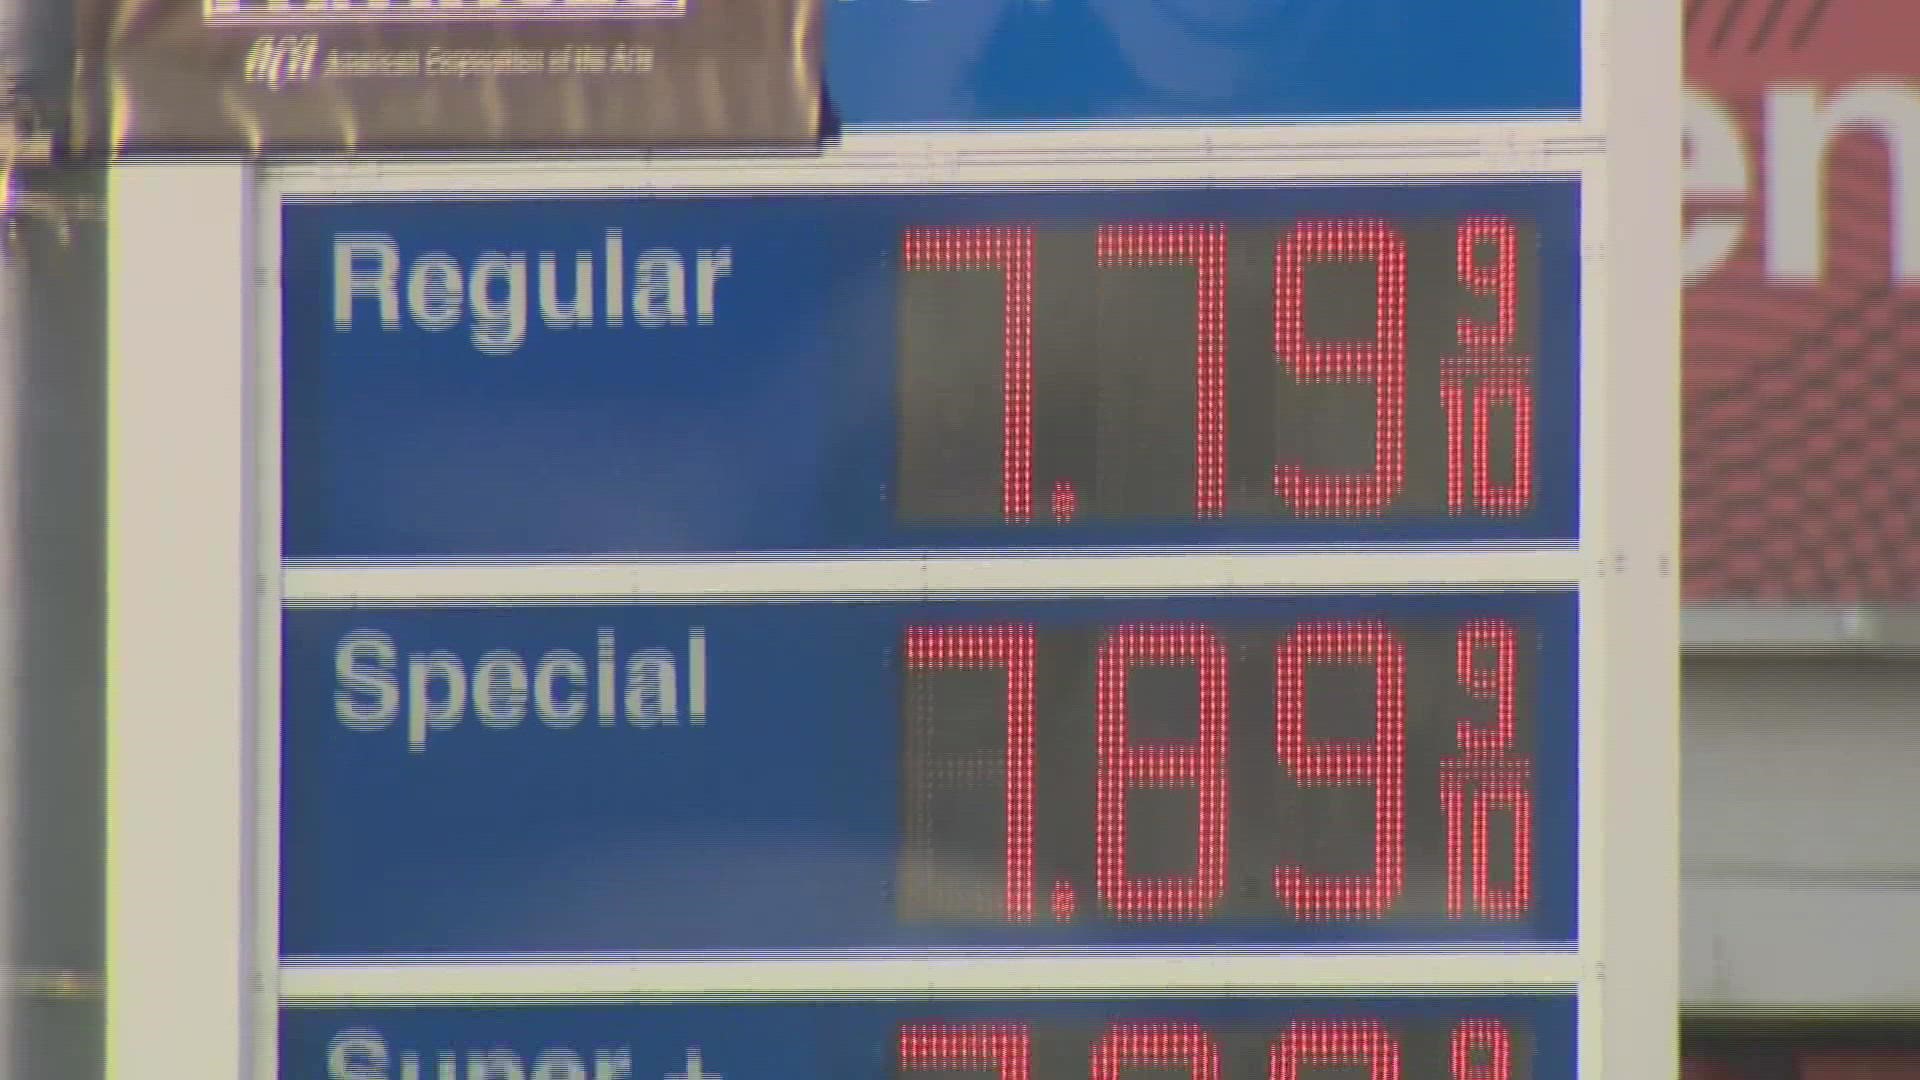 The holiday could save consumers 19 cents per gallon.